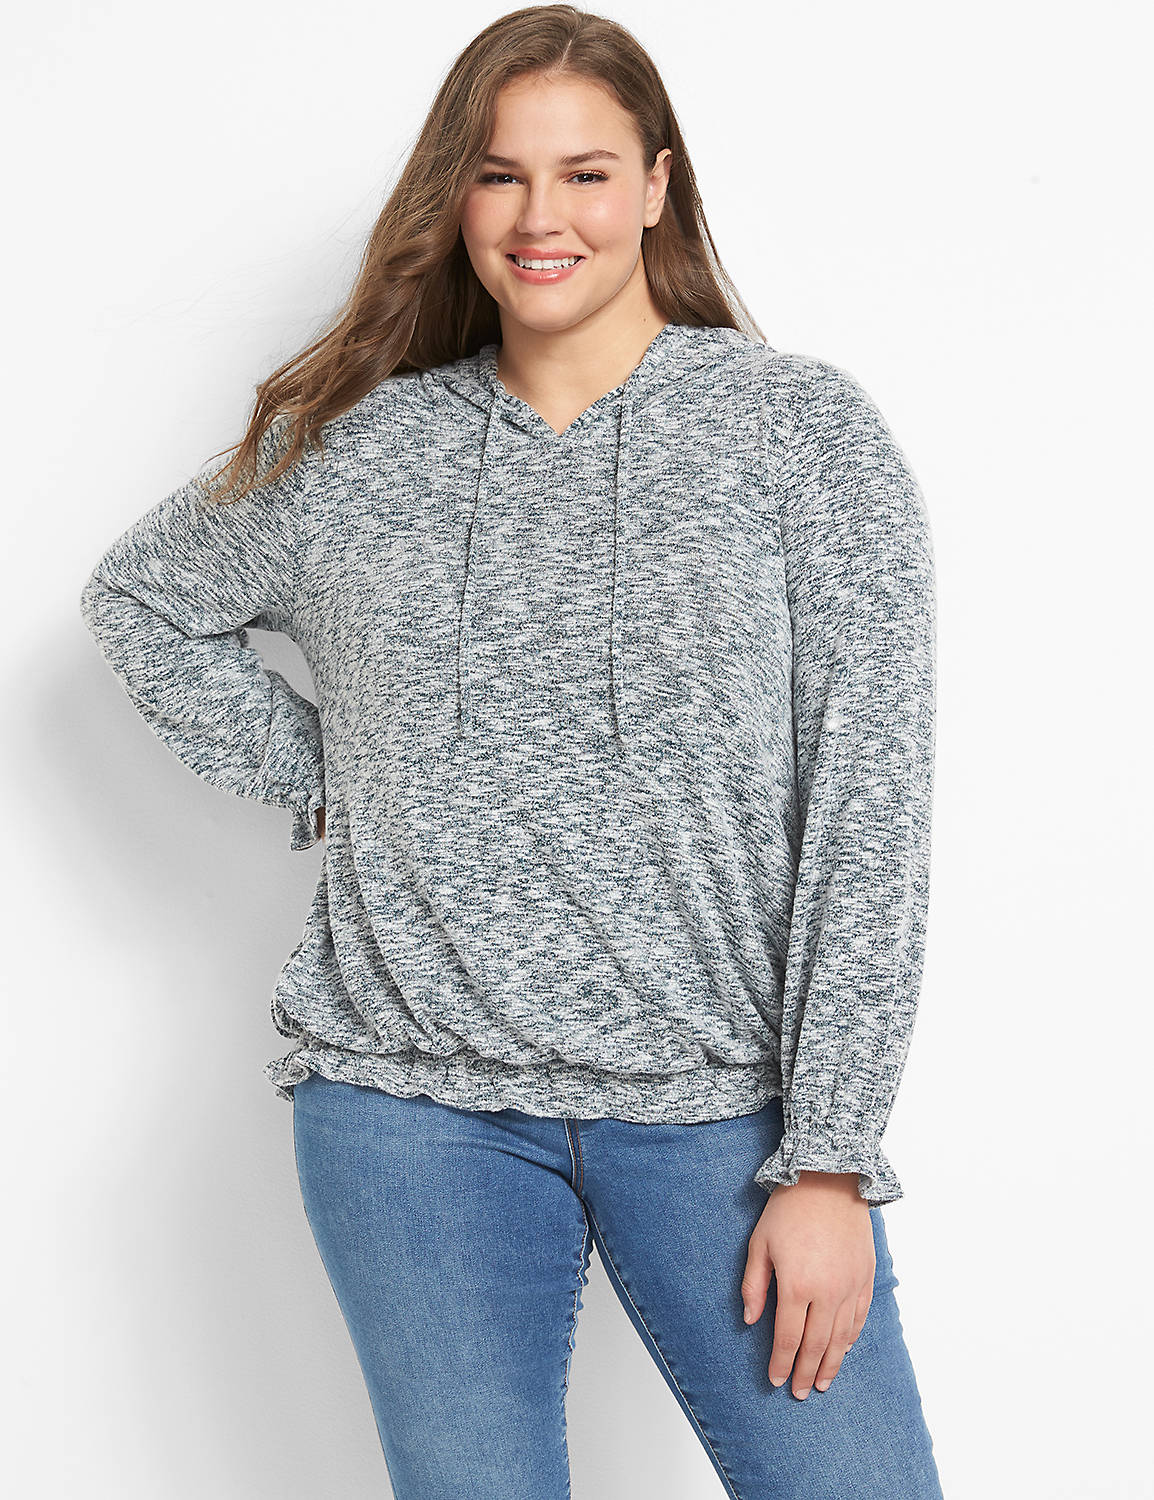 Hooded Top With Ruffle Hem